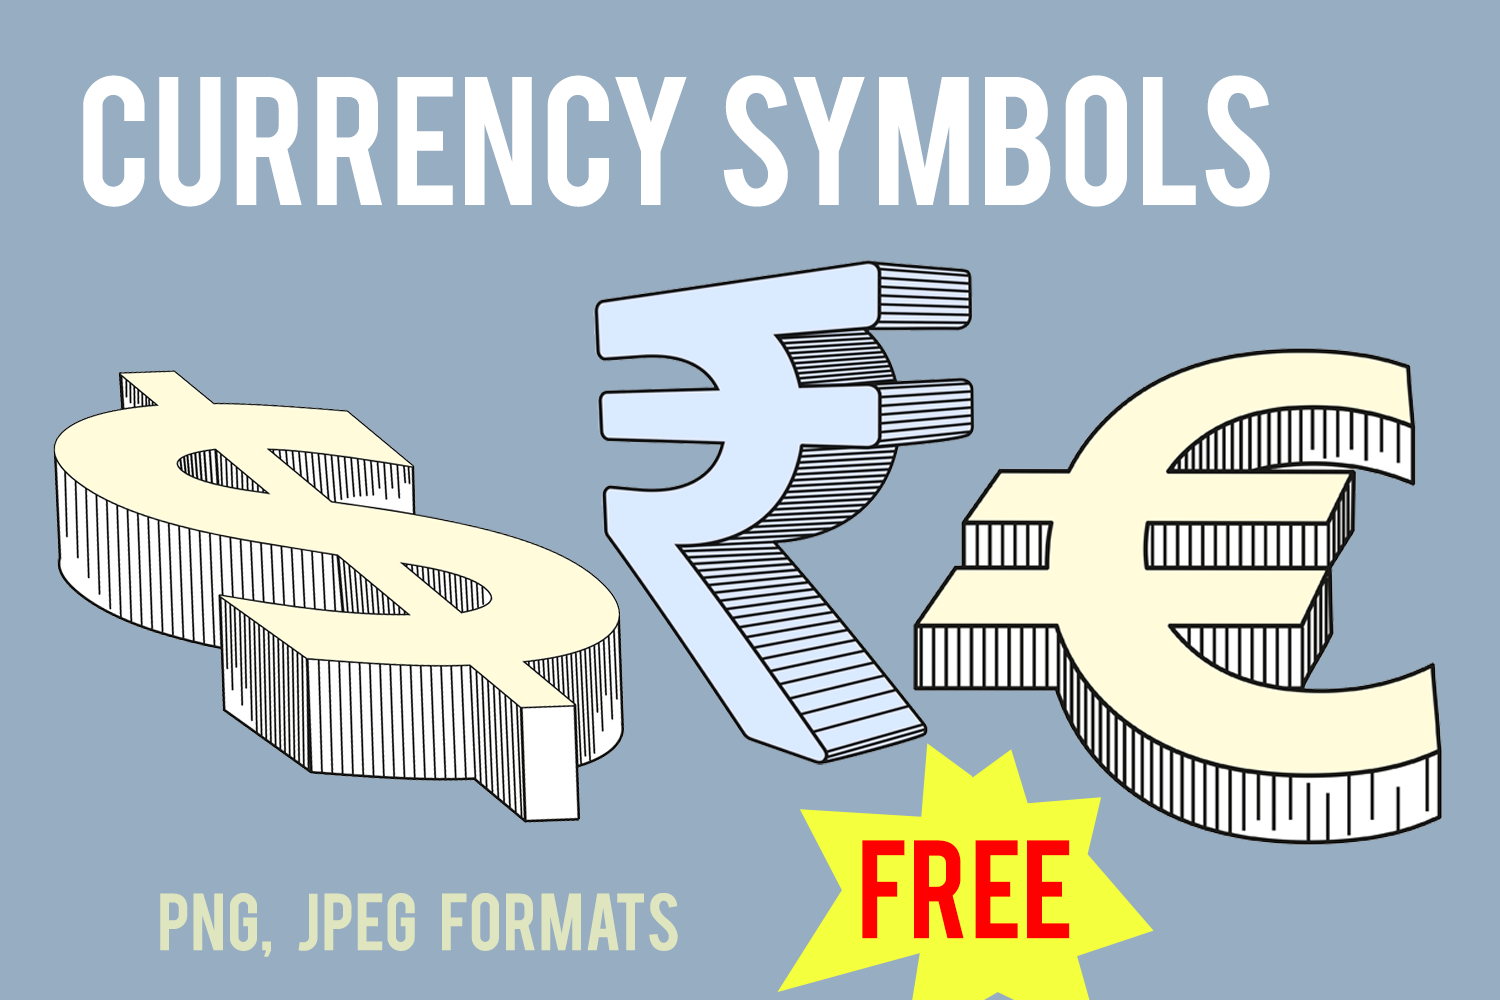 Currency symbols pinterest preview image.